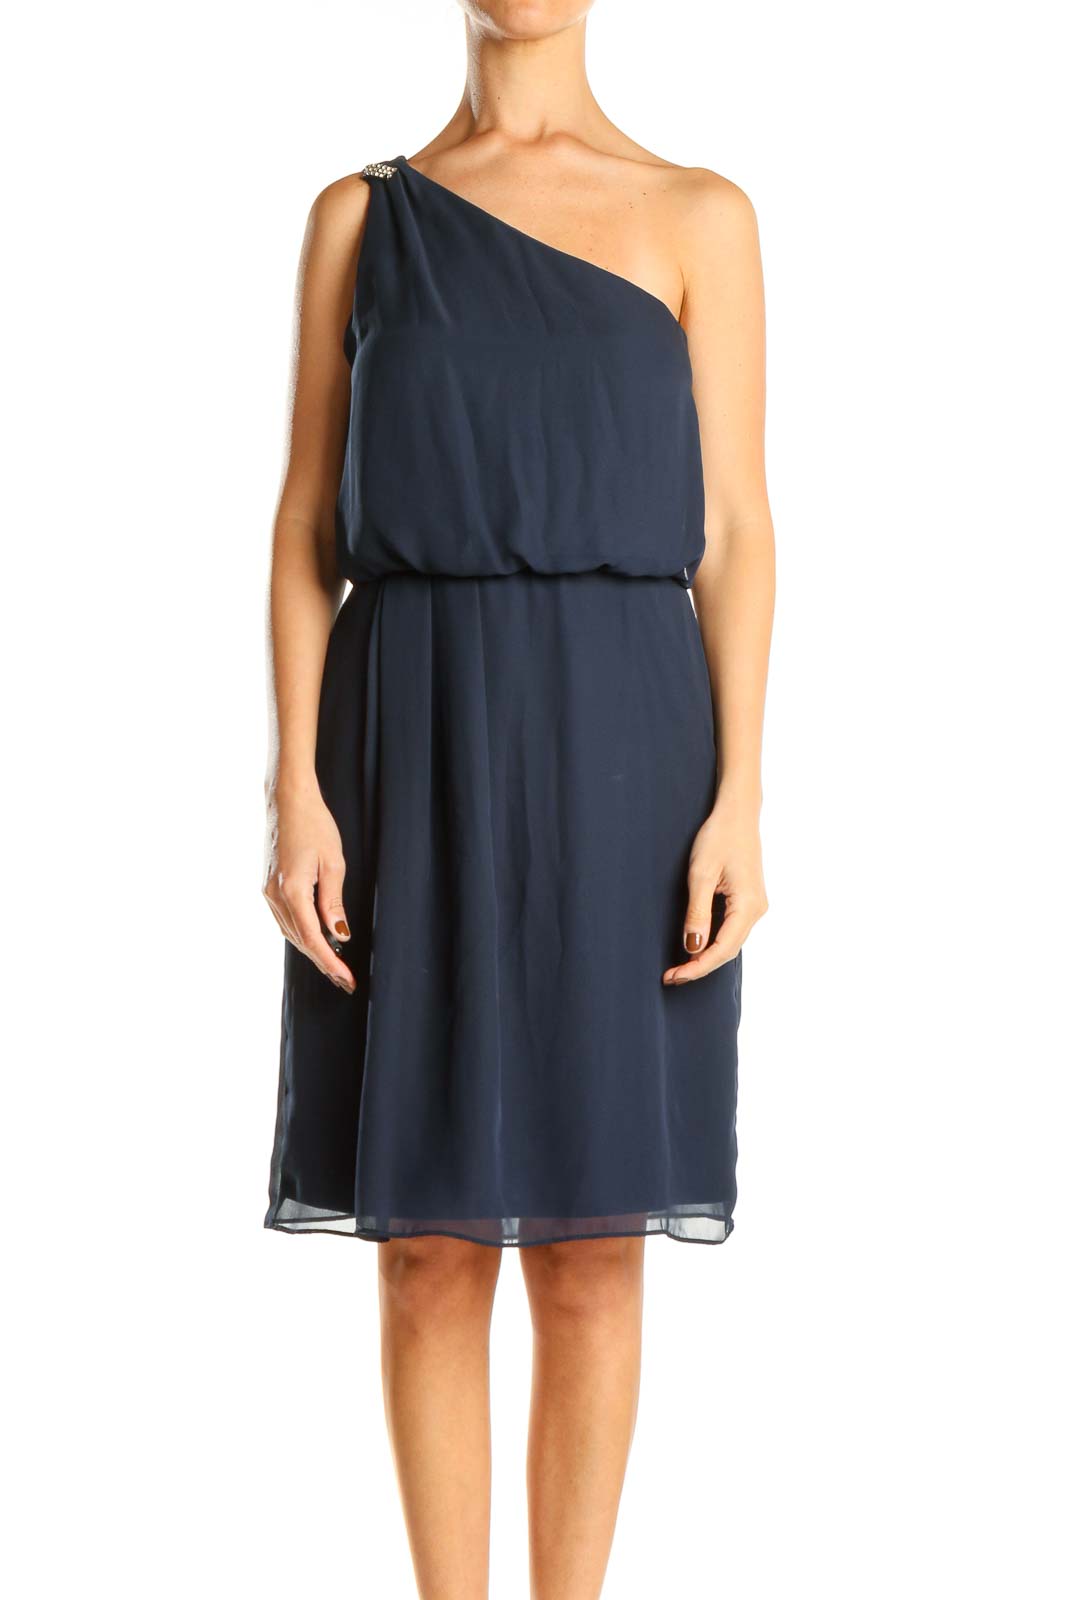 Blue Classic One Shoulder Fit & Flare Dress Front